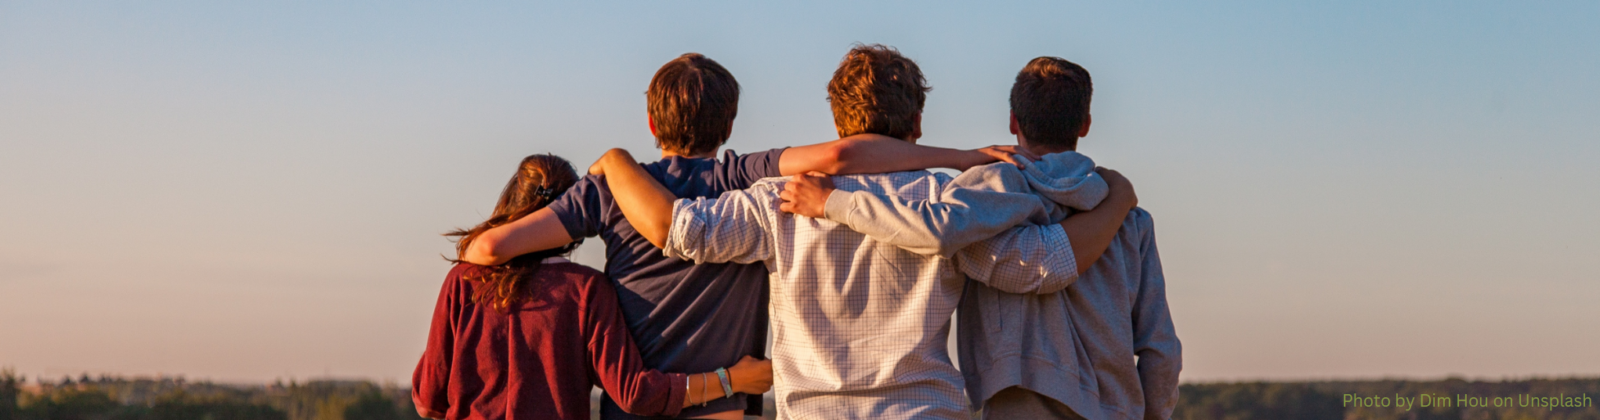 Four friends linking arms, overlooking a field.